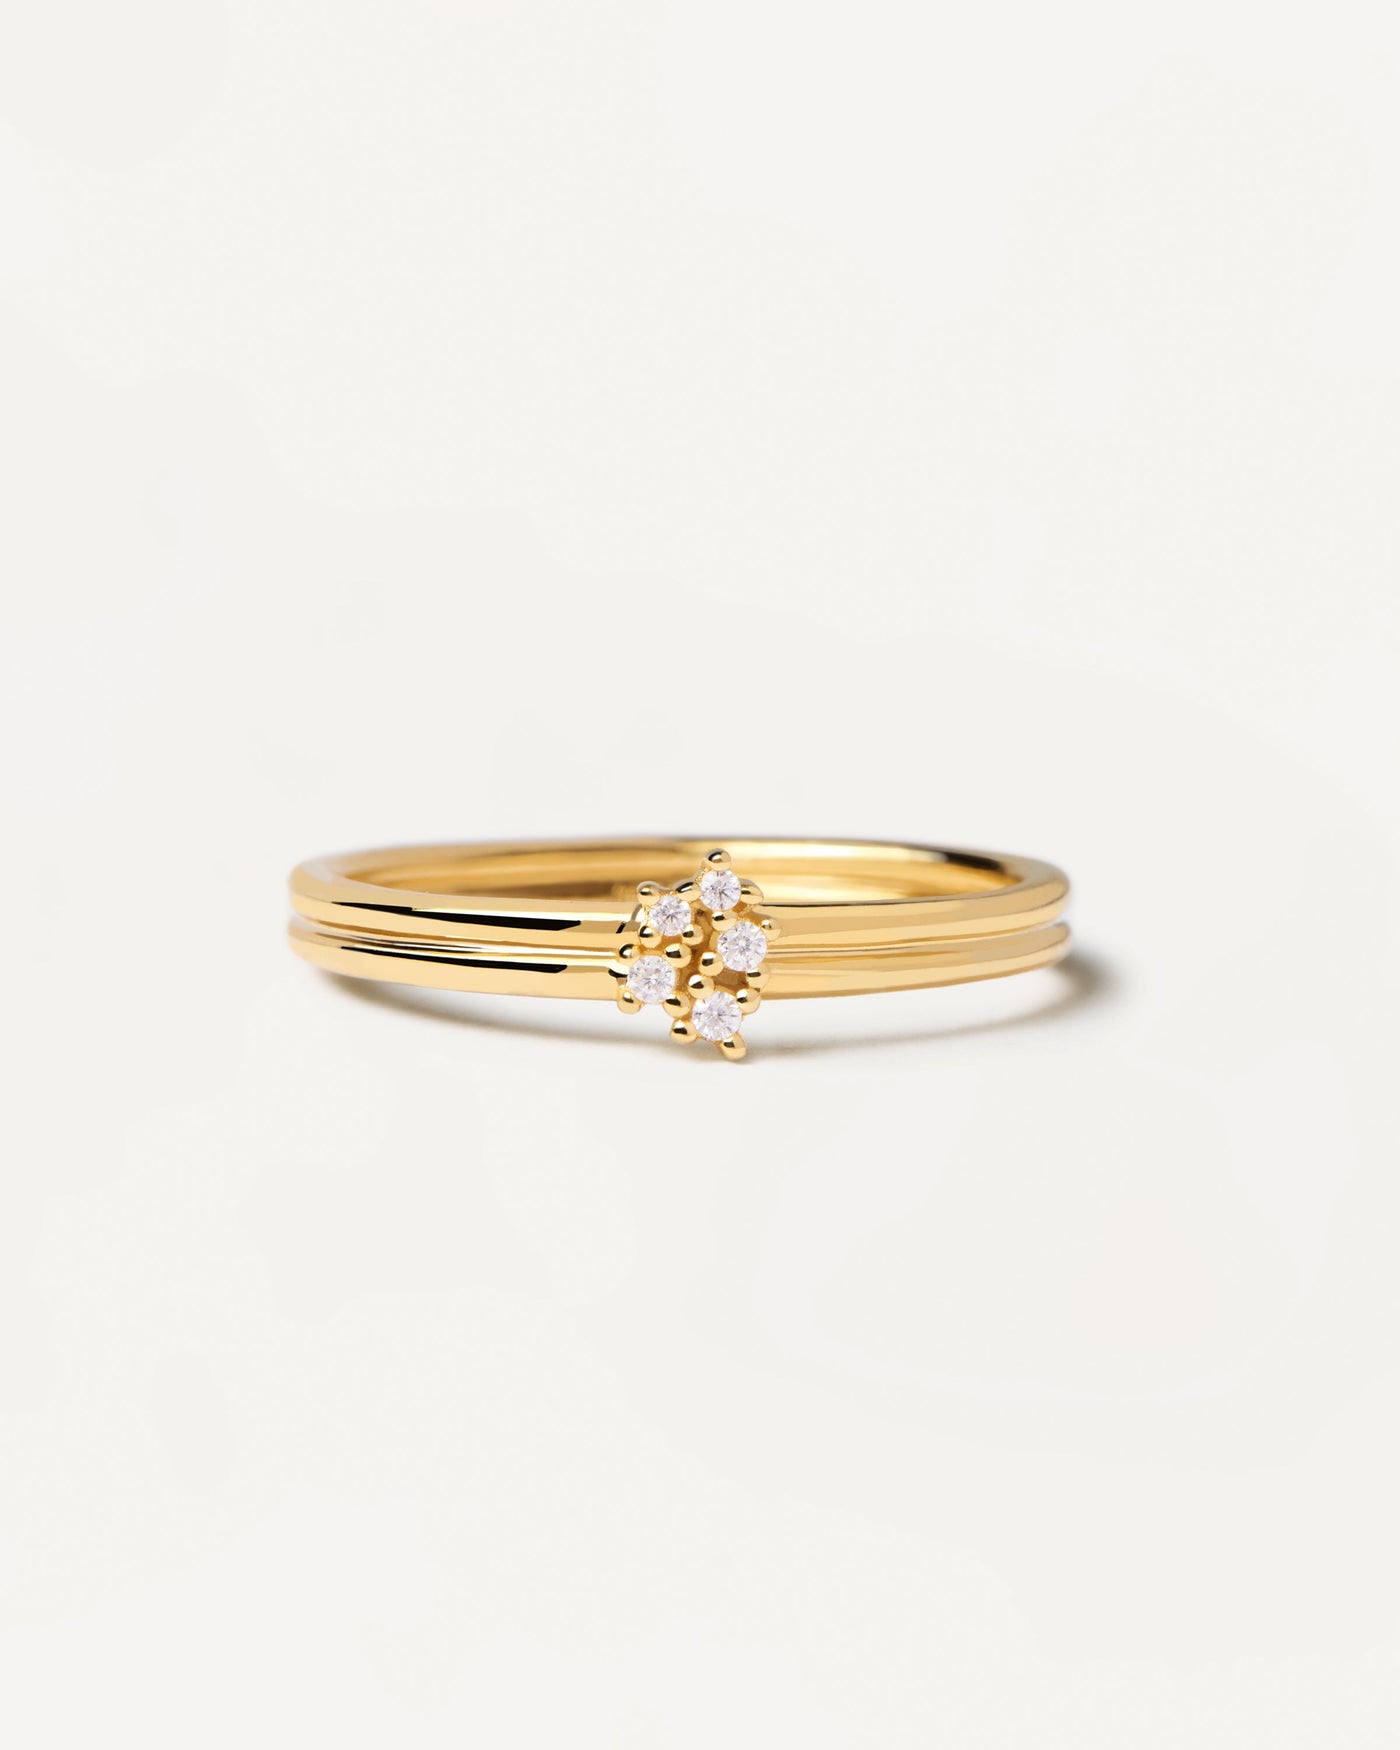 2023 Selection | Nova Ring. Gold-plated silver ring with two bands set with five dainty zirconias. Get the latest arrival from PDPAOLA. Place your order safely and get this Best Seller. Free Shipping.